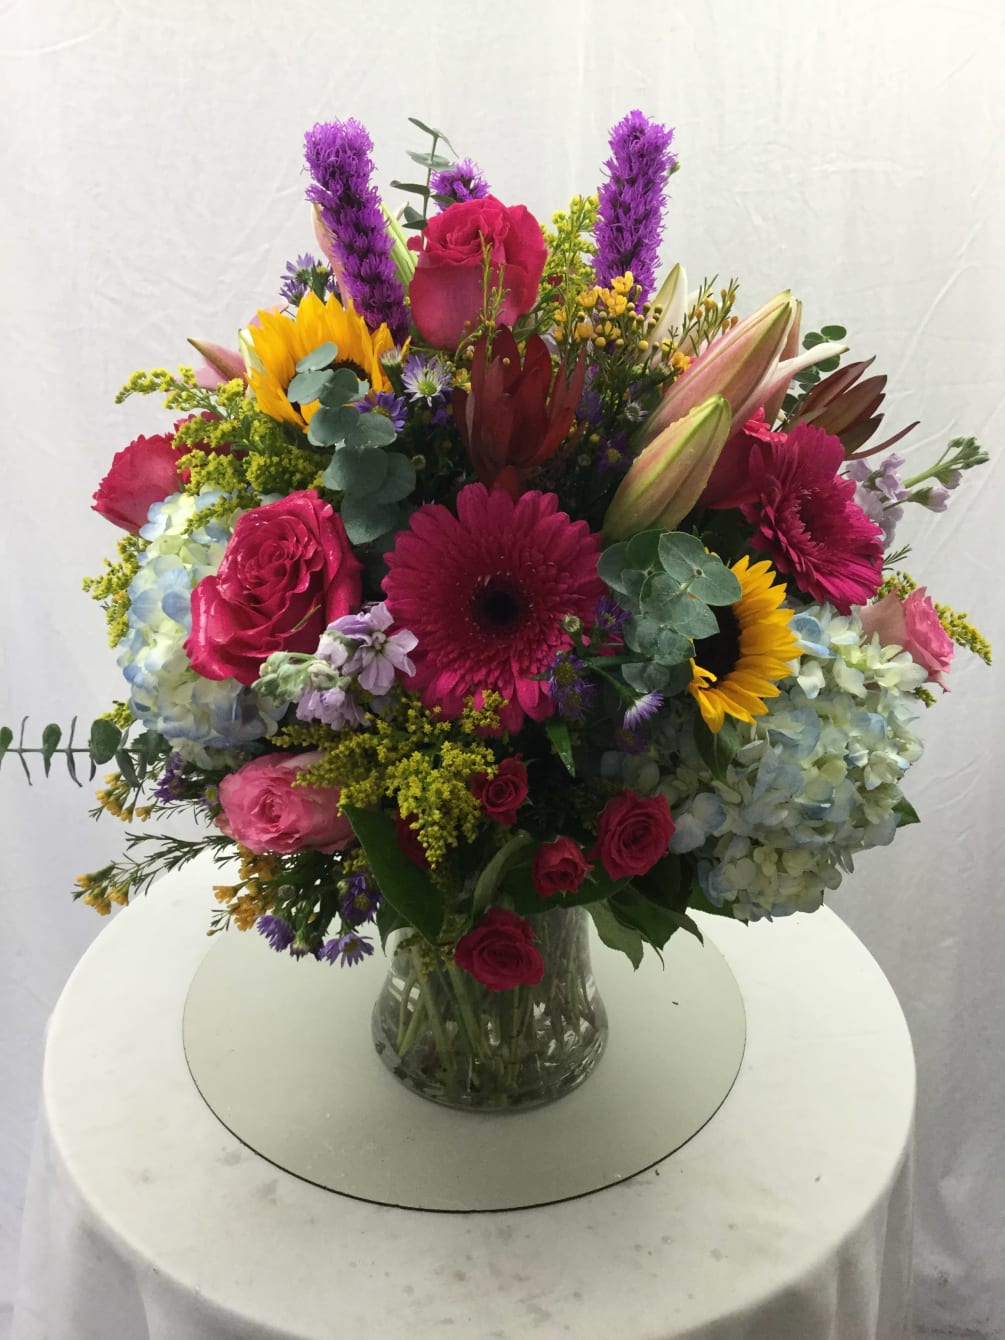 This absolutely stunning bouquet makes for a perfect gift for that special